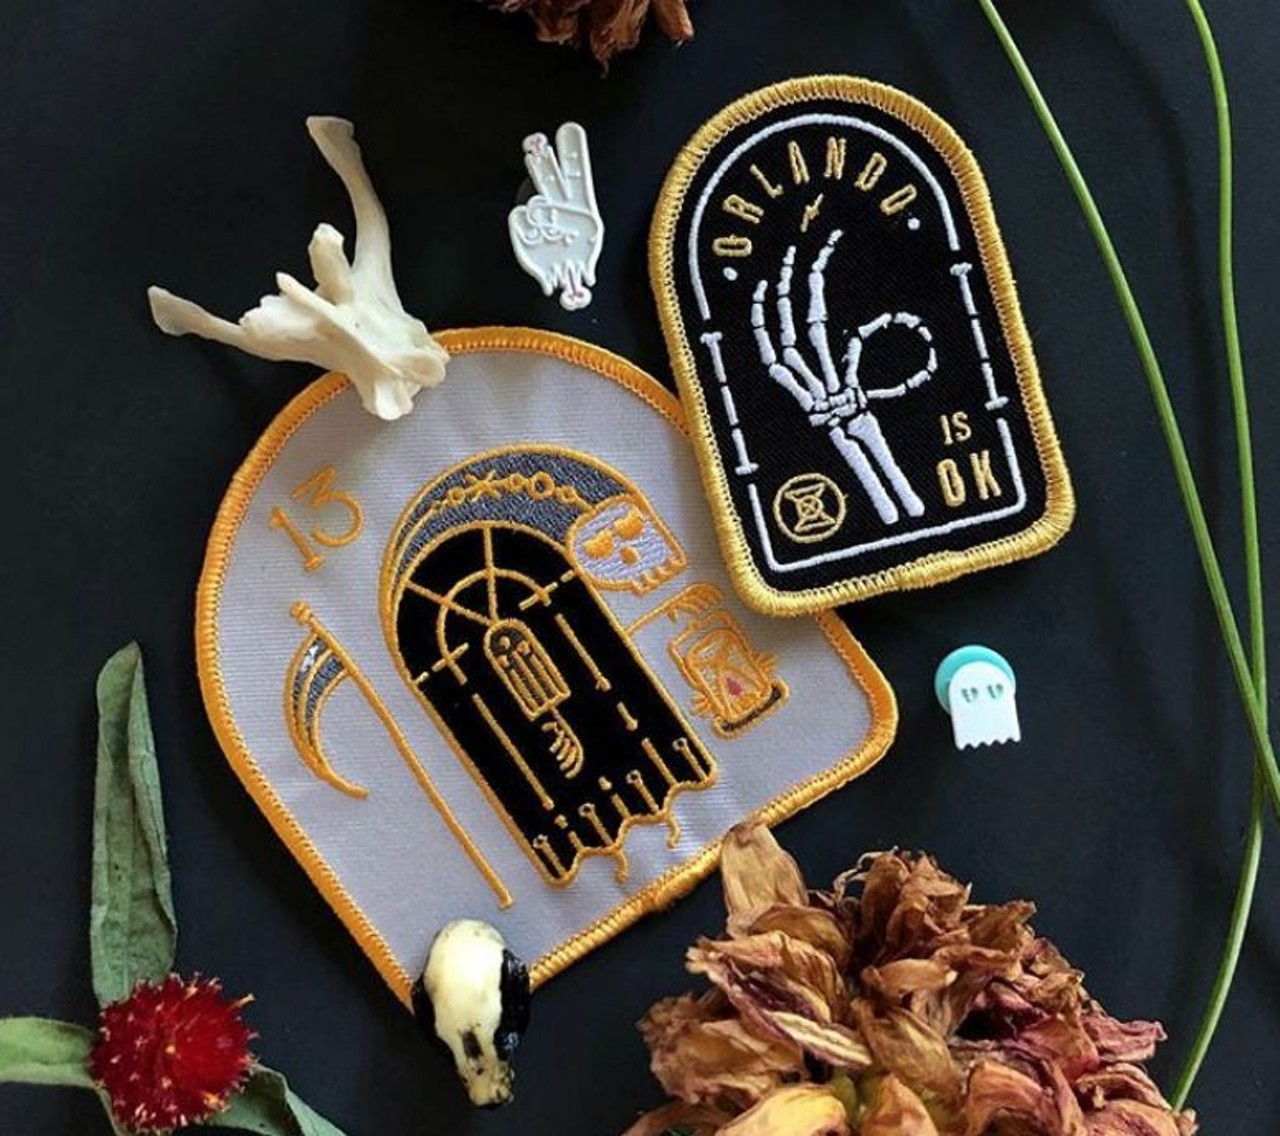 Secret Society Goods  
Created out of the love of design and the slightly morbid, Secret Society is a great way to add dark flair to any outfit with their patches, pins and bandanas. 
Photo via secretsocietygoods / Instagram